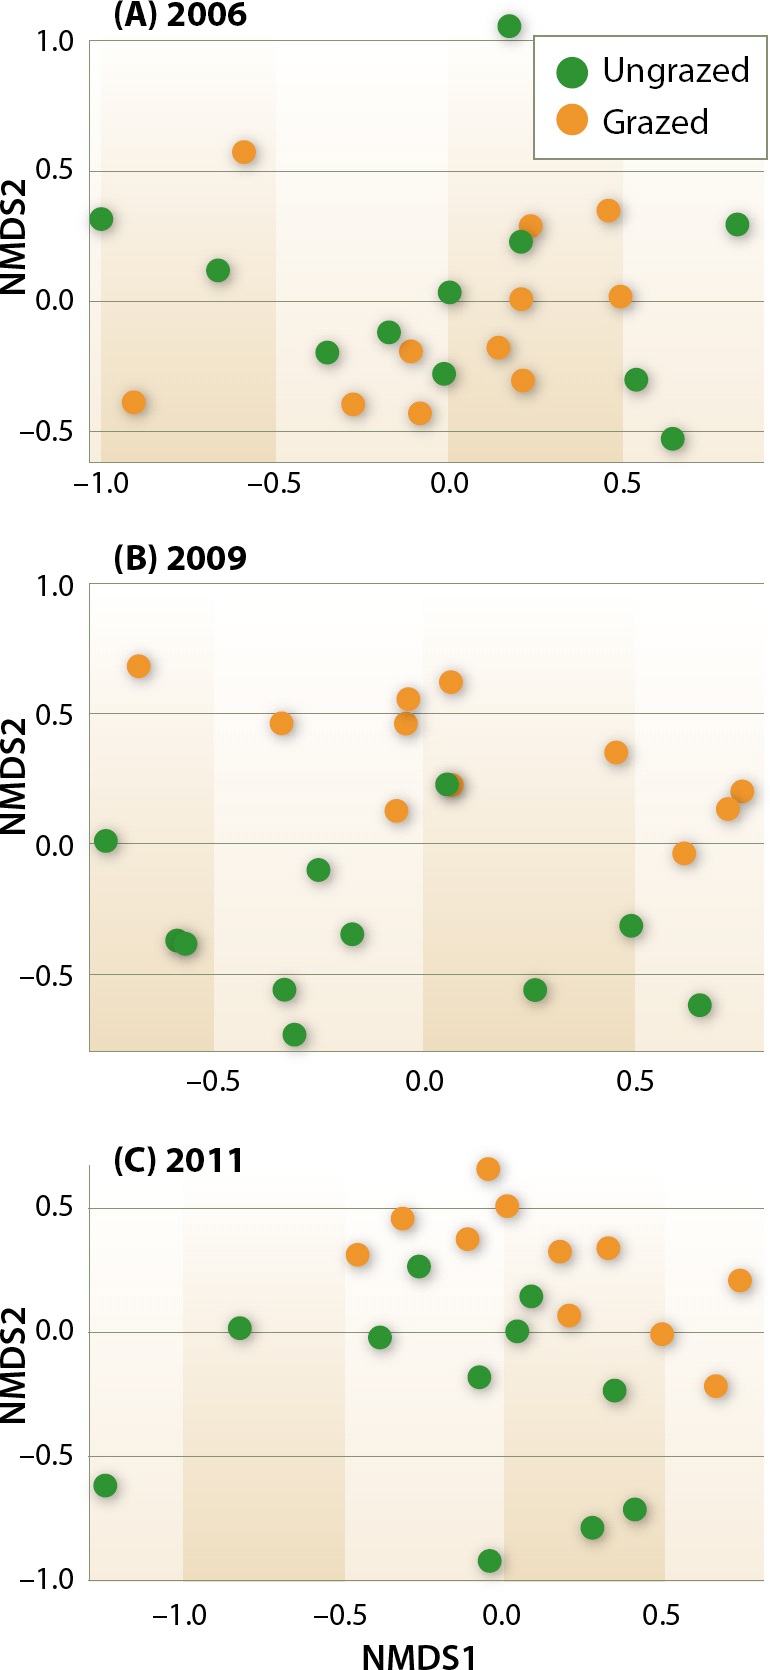 Overall plant community changes between grazed and ungrazed plots in 2006 (A), 2009 (B) and 2011 (C) based on NMDS ordination. In 2006, no difference in species composition was detected between grazed and ungrazed plots, as indicated by the intermingled dots (A). In 2009 and 2011, the dots diverge, indicating a significant difference in plant species composition between grazed and ungrazed plots after grazing was initiated (B and C). Significance values for differences between grazed and ungrazed plots were P = 0.68, P < 0.01 and P < 0.01 for 2006, 2009 and 2011, respectively.